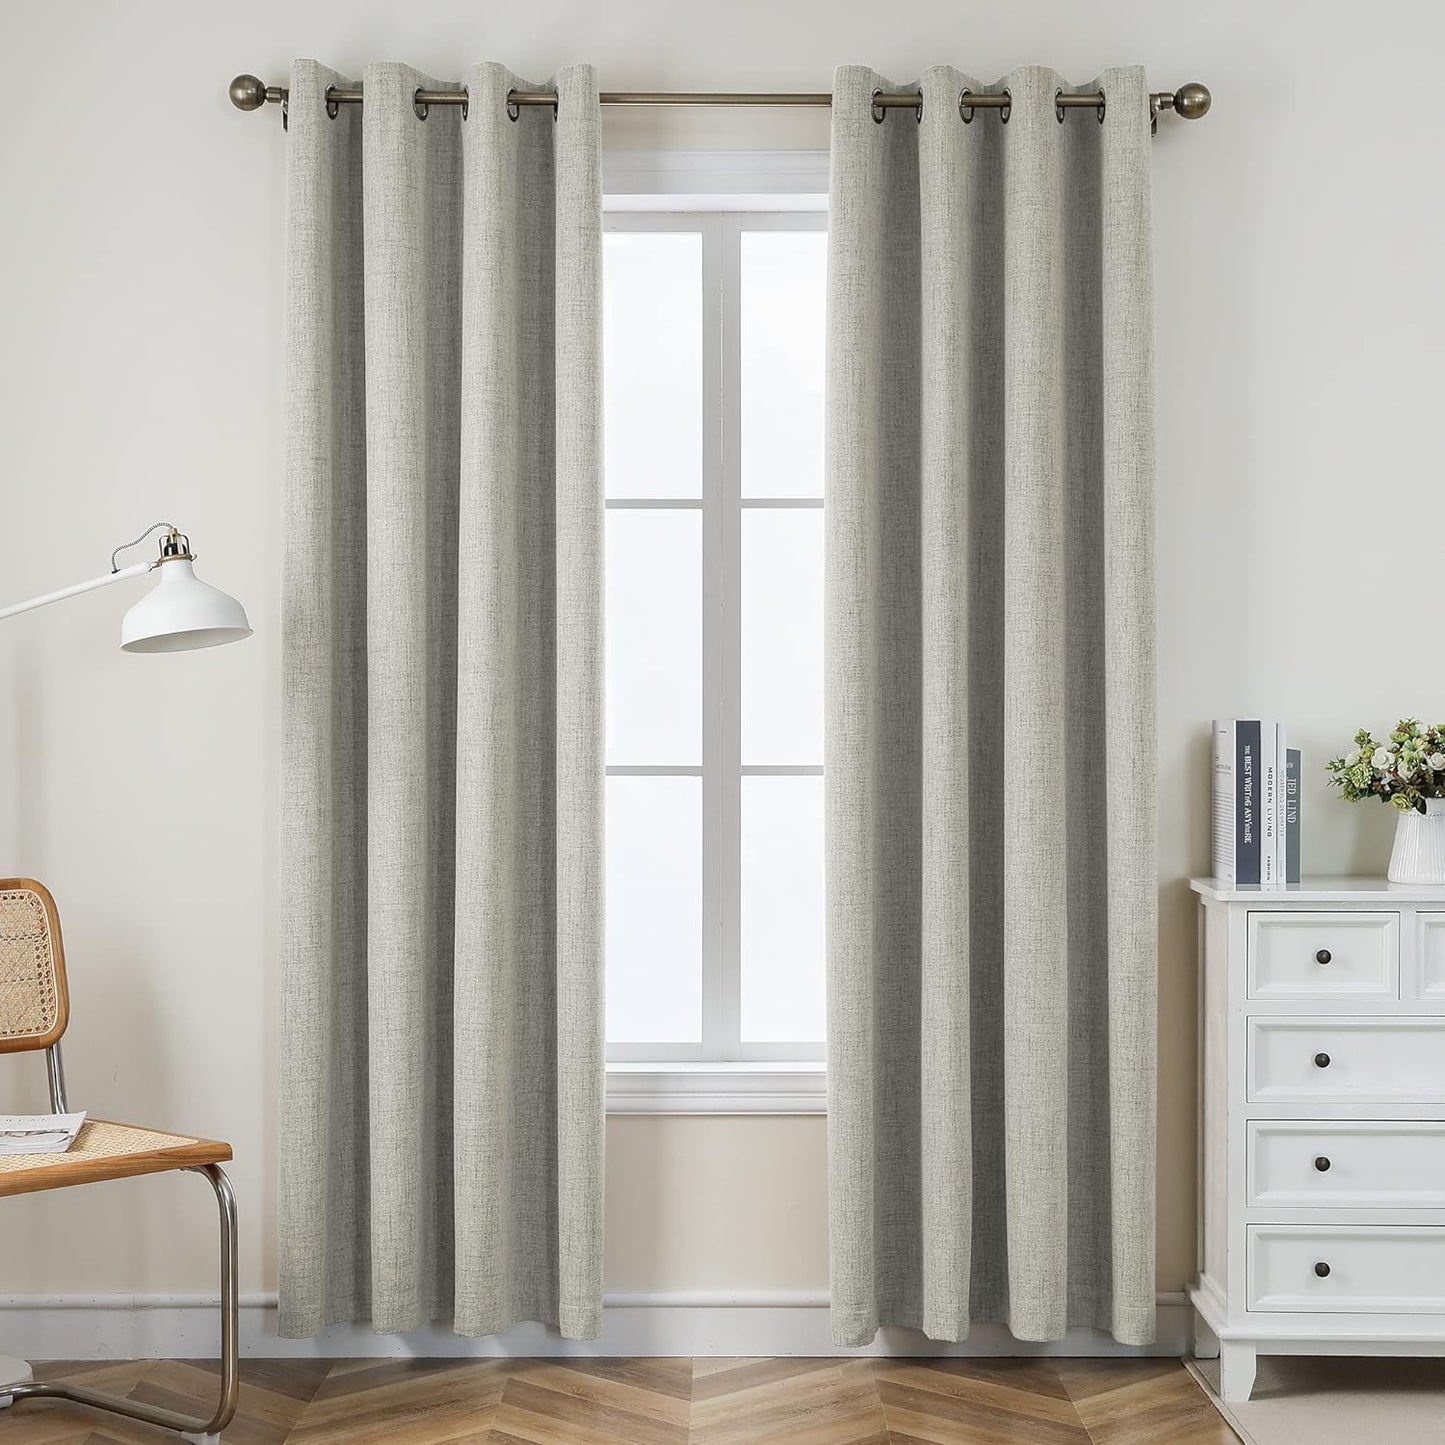 CUCRAF Full Blackout Window Curtains 84 Inches Long,Faux Linen Look Thermal Insulated Grommet Drapes Panels for Bedroom Living Room,Set of 2(52 X 84 Inches, Light Khaki)  CUCRAF Light Beige 52 X 108 Inches 